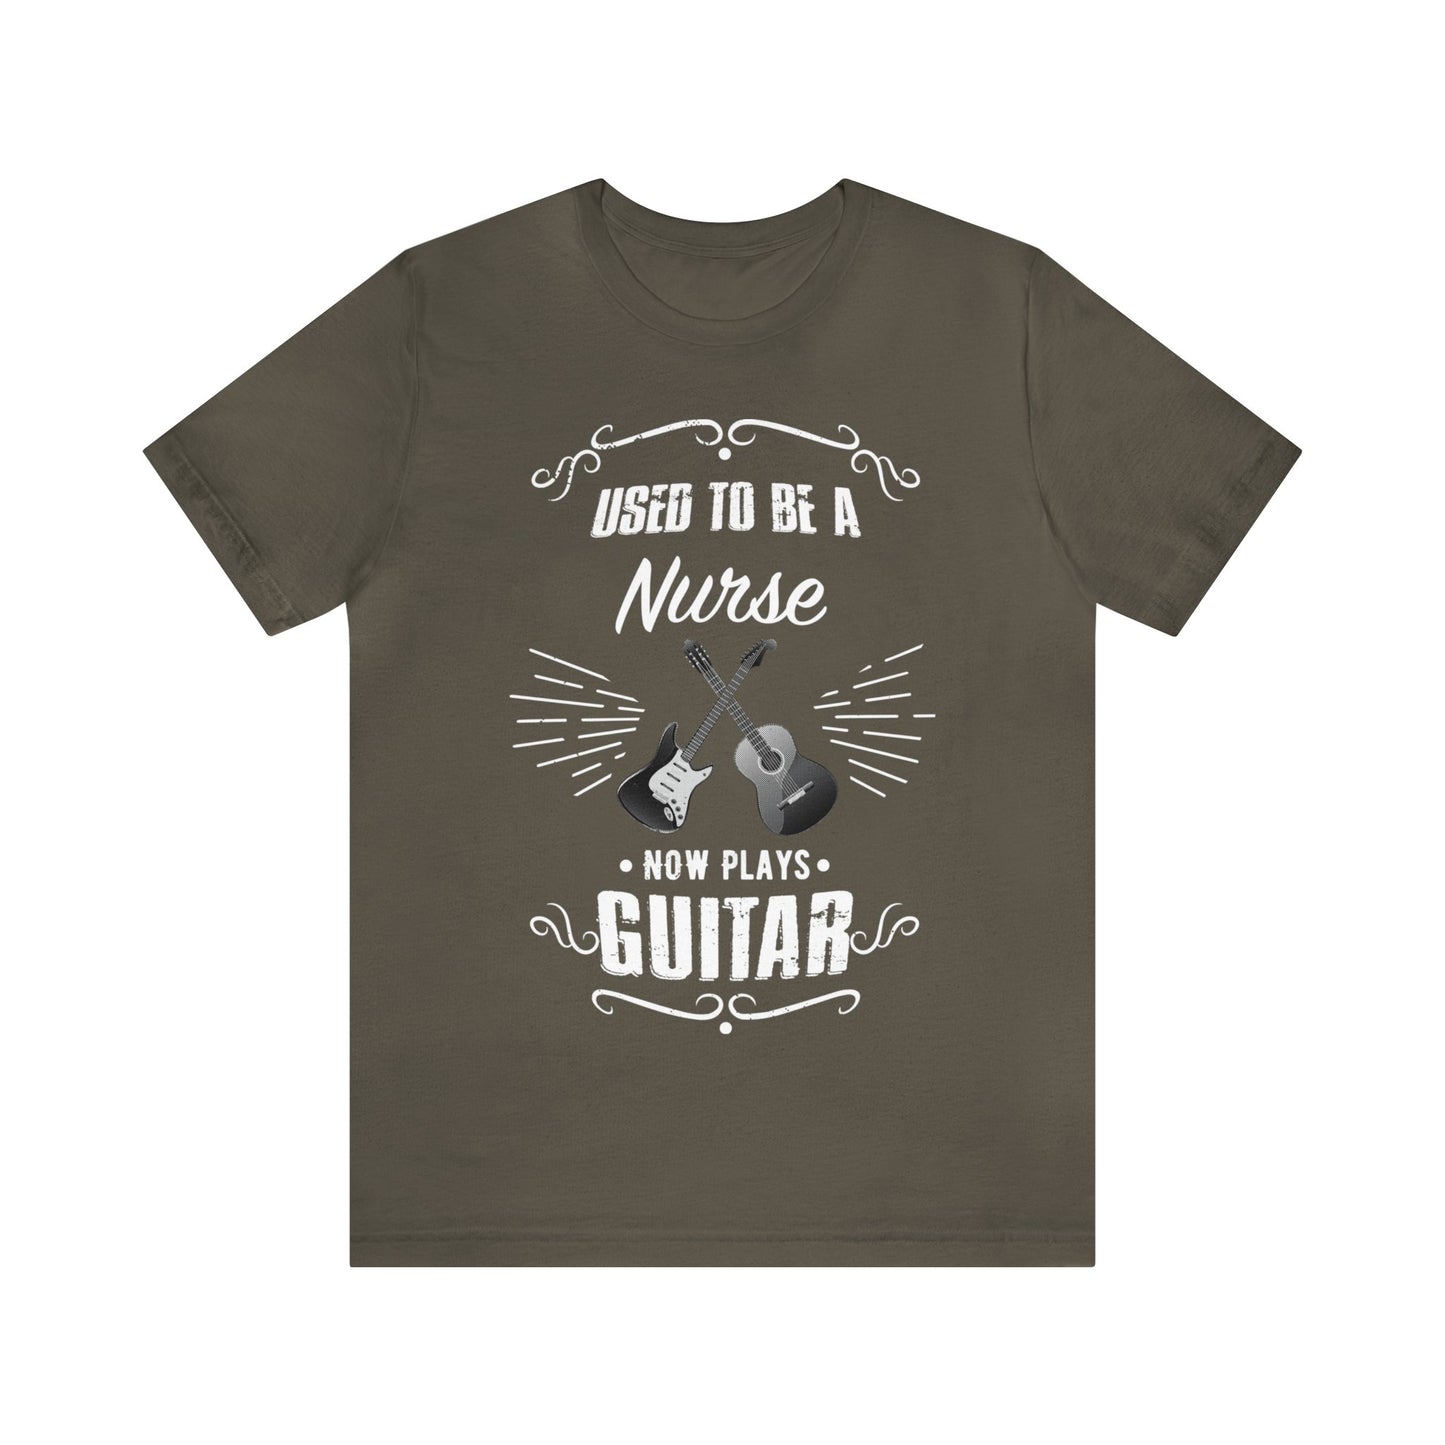 Used to be a NURSE; Now Plays GUITAR - Funny Retirement Gift, Unisex T-shirt Bella+Canvas 3001, dark shirt colors for amateur musician/guitar player